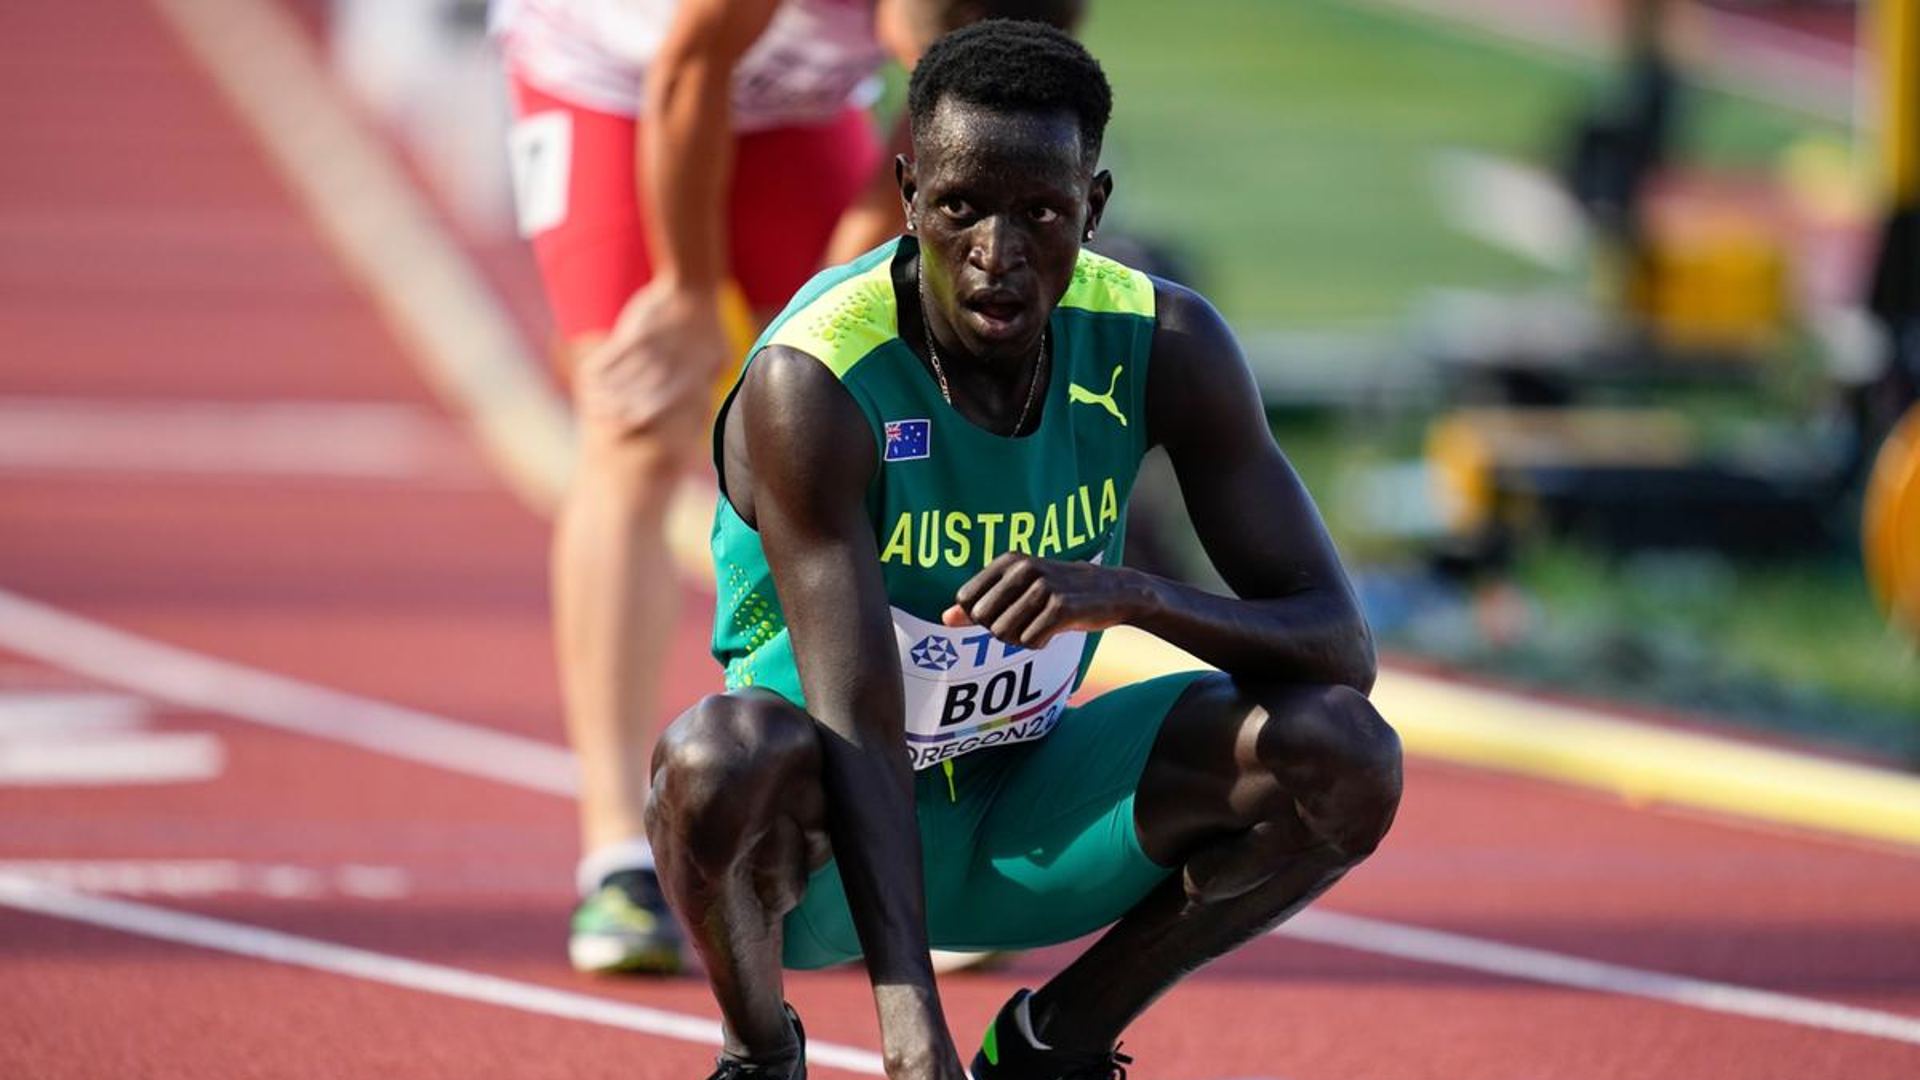 Peter Bol after his race at the World Championships 2022 (Image - Peter in a file photo)